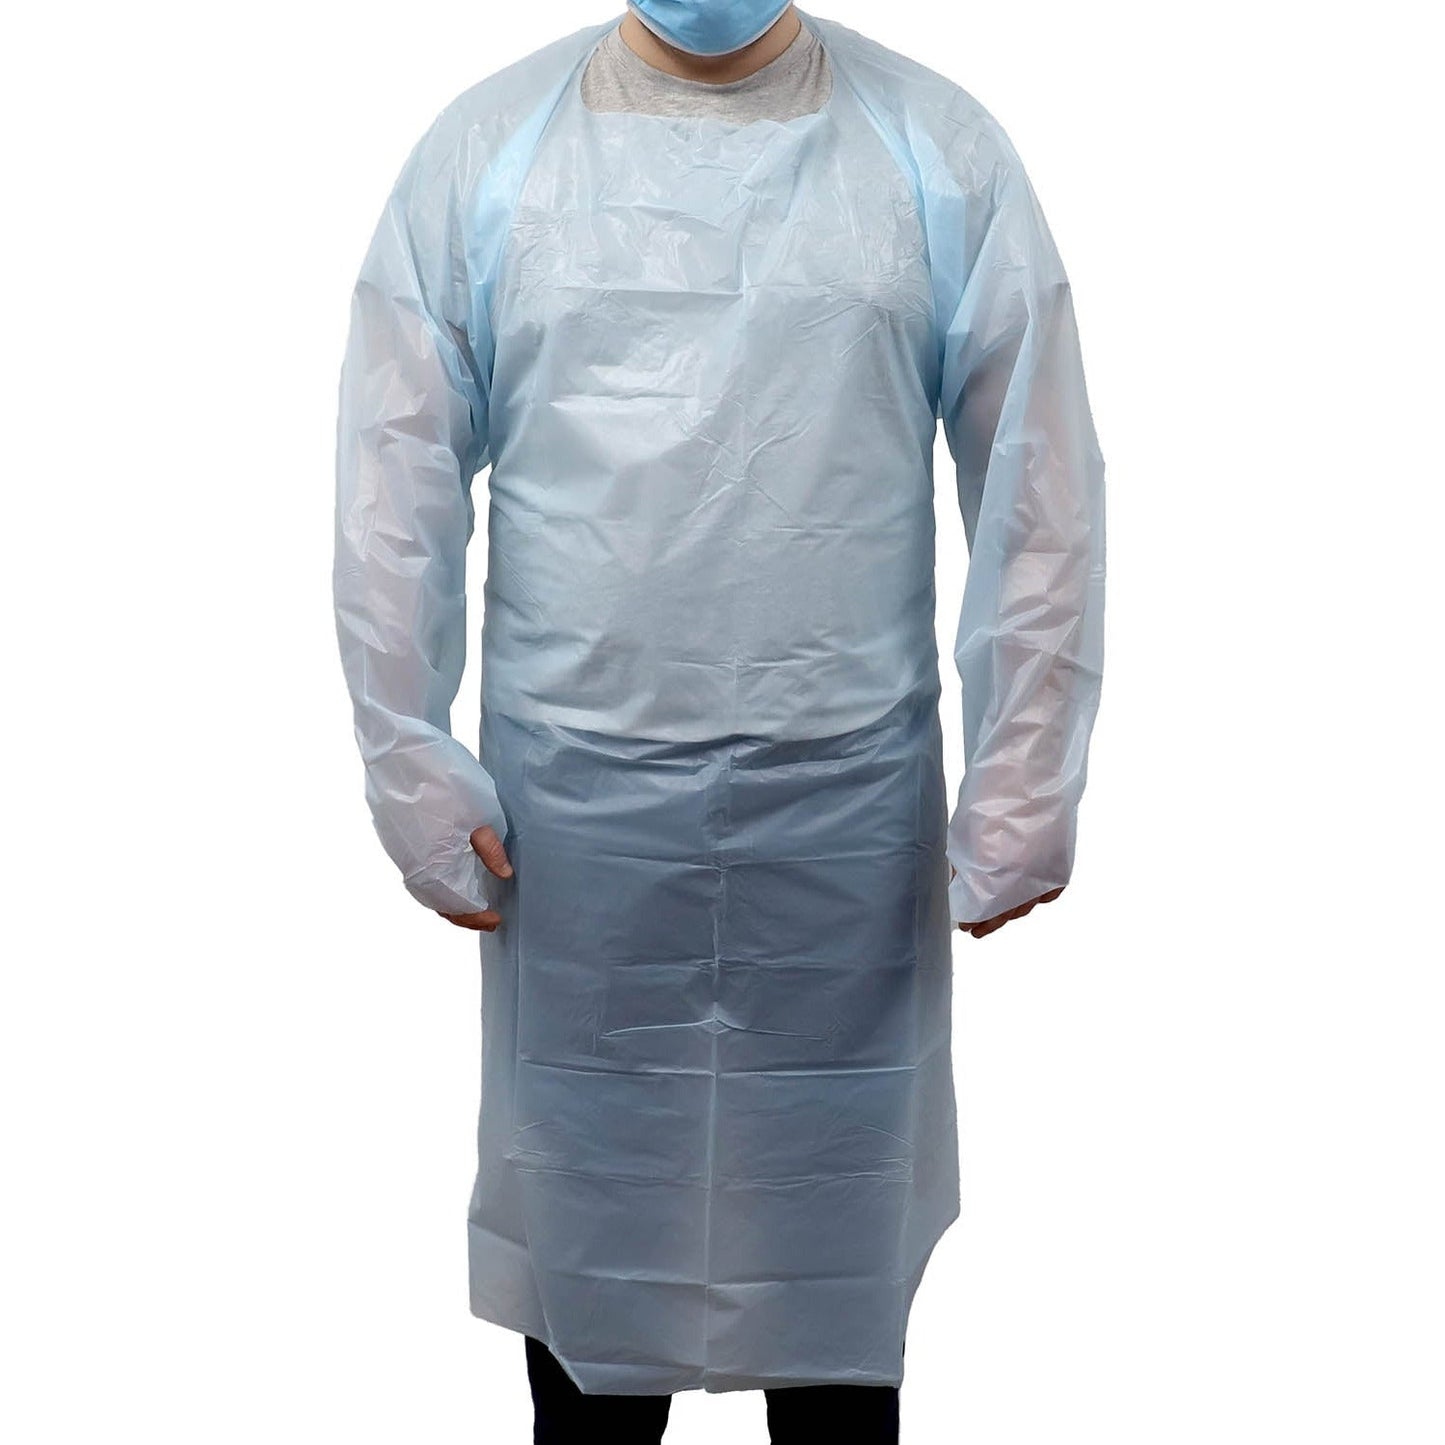 Blue Thumb Loop Examination Gowns - Pack of 10 - CLEARANCE due to short date